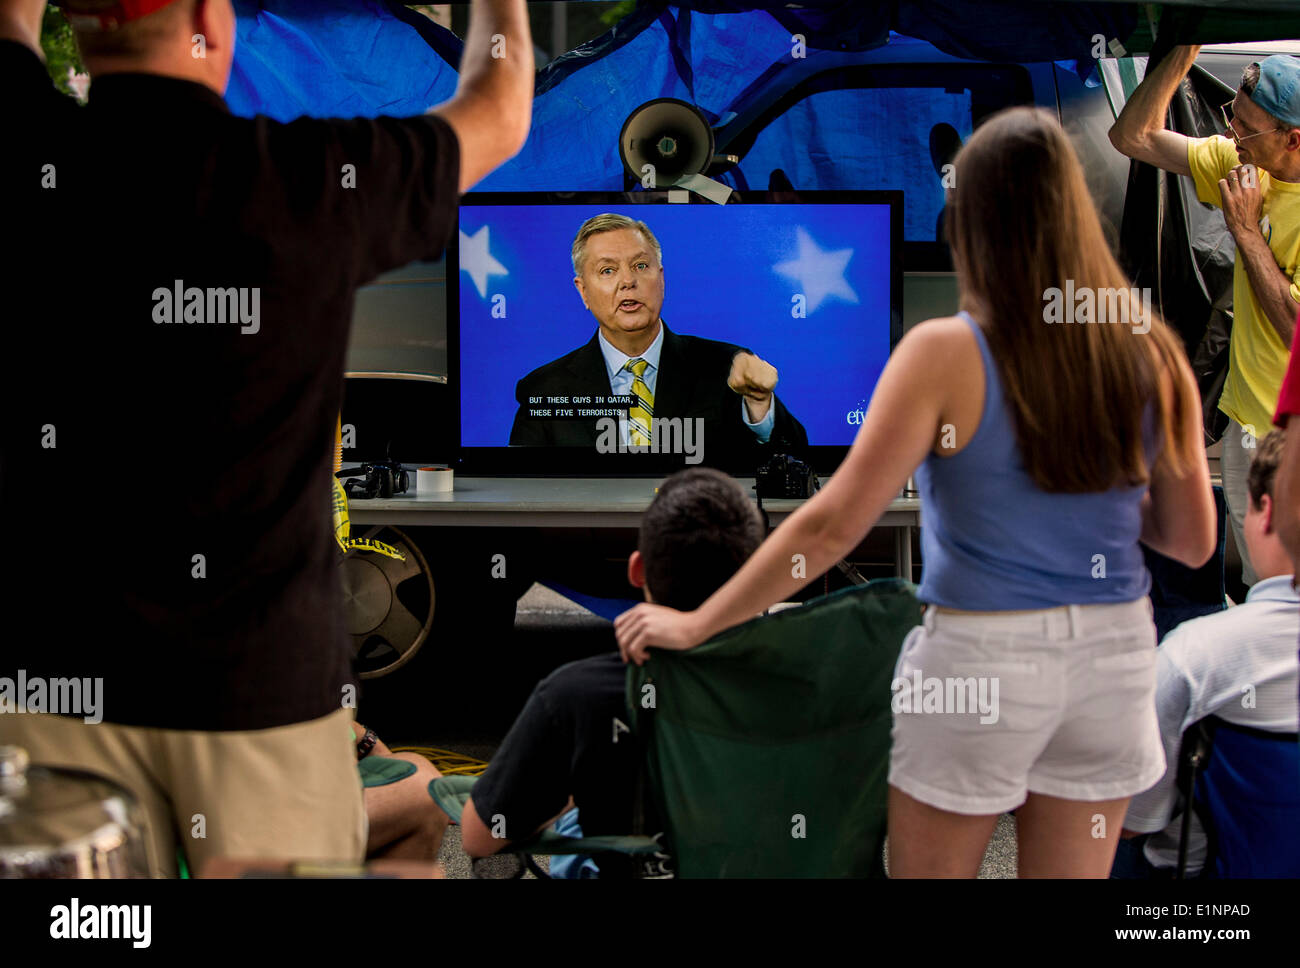 Columbia, South Carolina, USA. 07th June, 2014. Supporters of candidate Lee Bright watch the South Carolina Republican Senate Primary debate in a tent they set up outside the studios of South Carolina Educational Television. Credit:  Brian Cahn/ZUMAPRESS.com/Alamy Live News Stock Photo